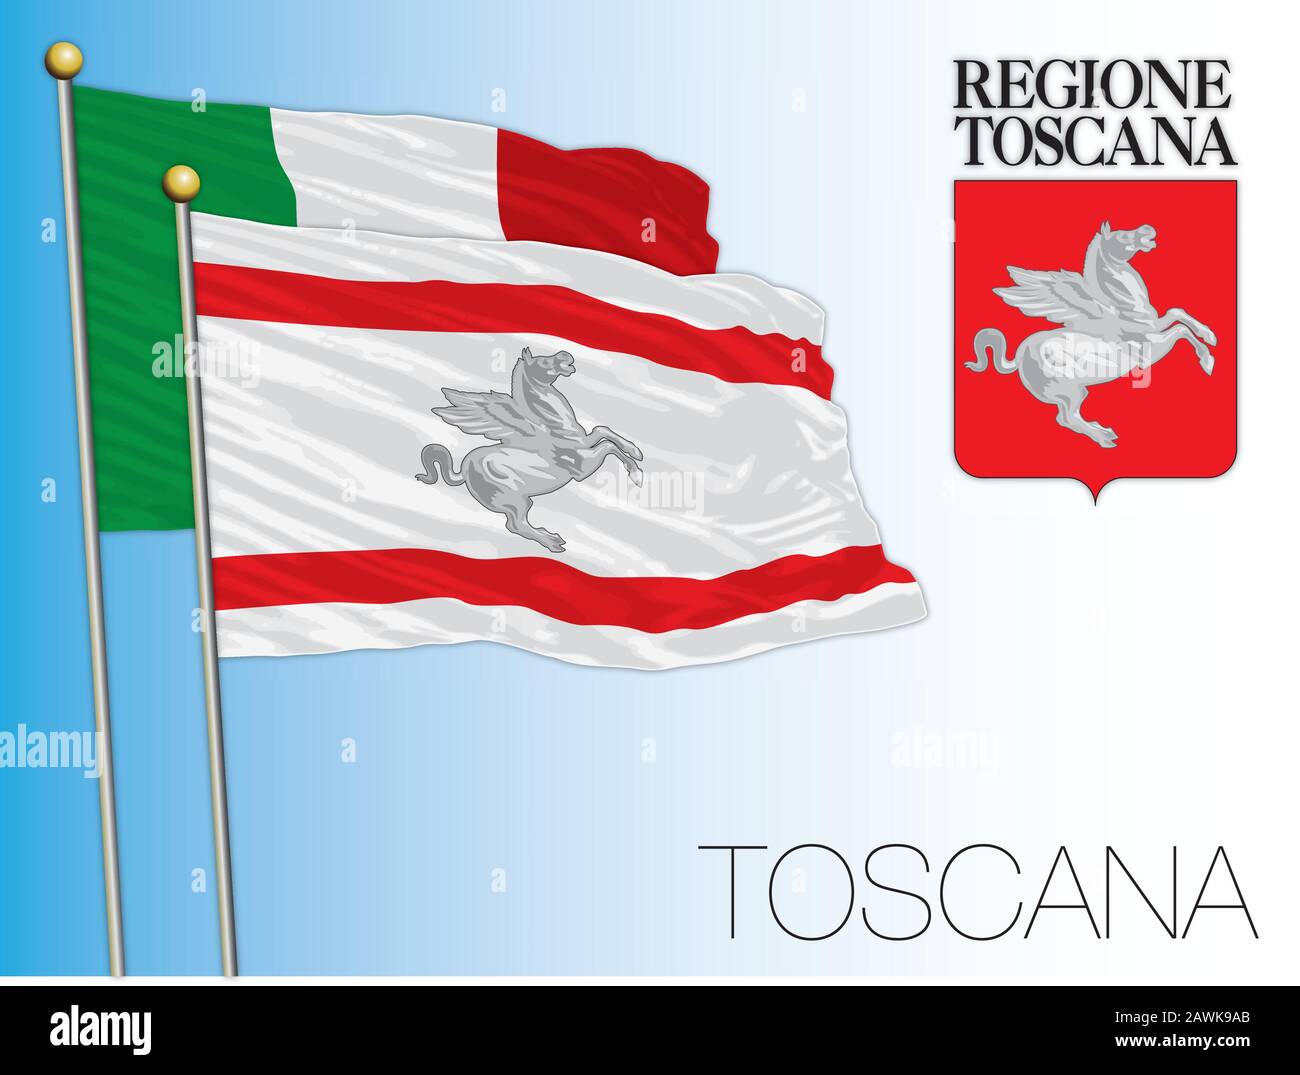 Tuscany official regional flag and coat of arms, Italy, vector illustration Stock Vector